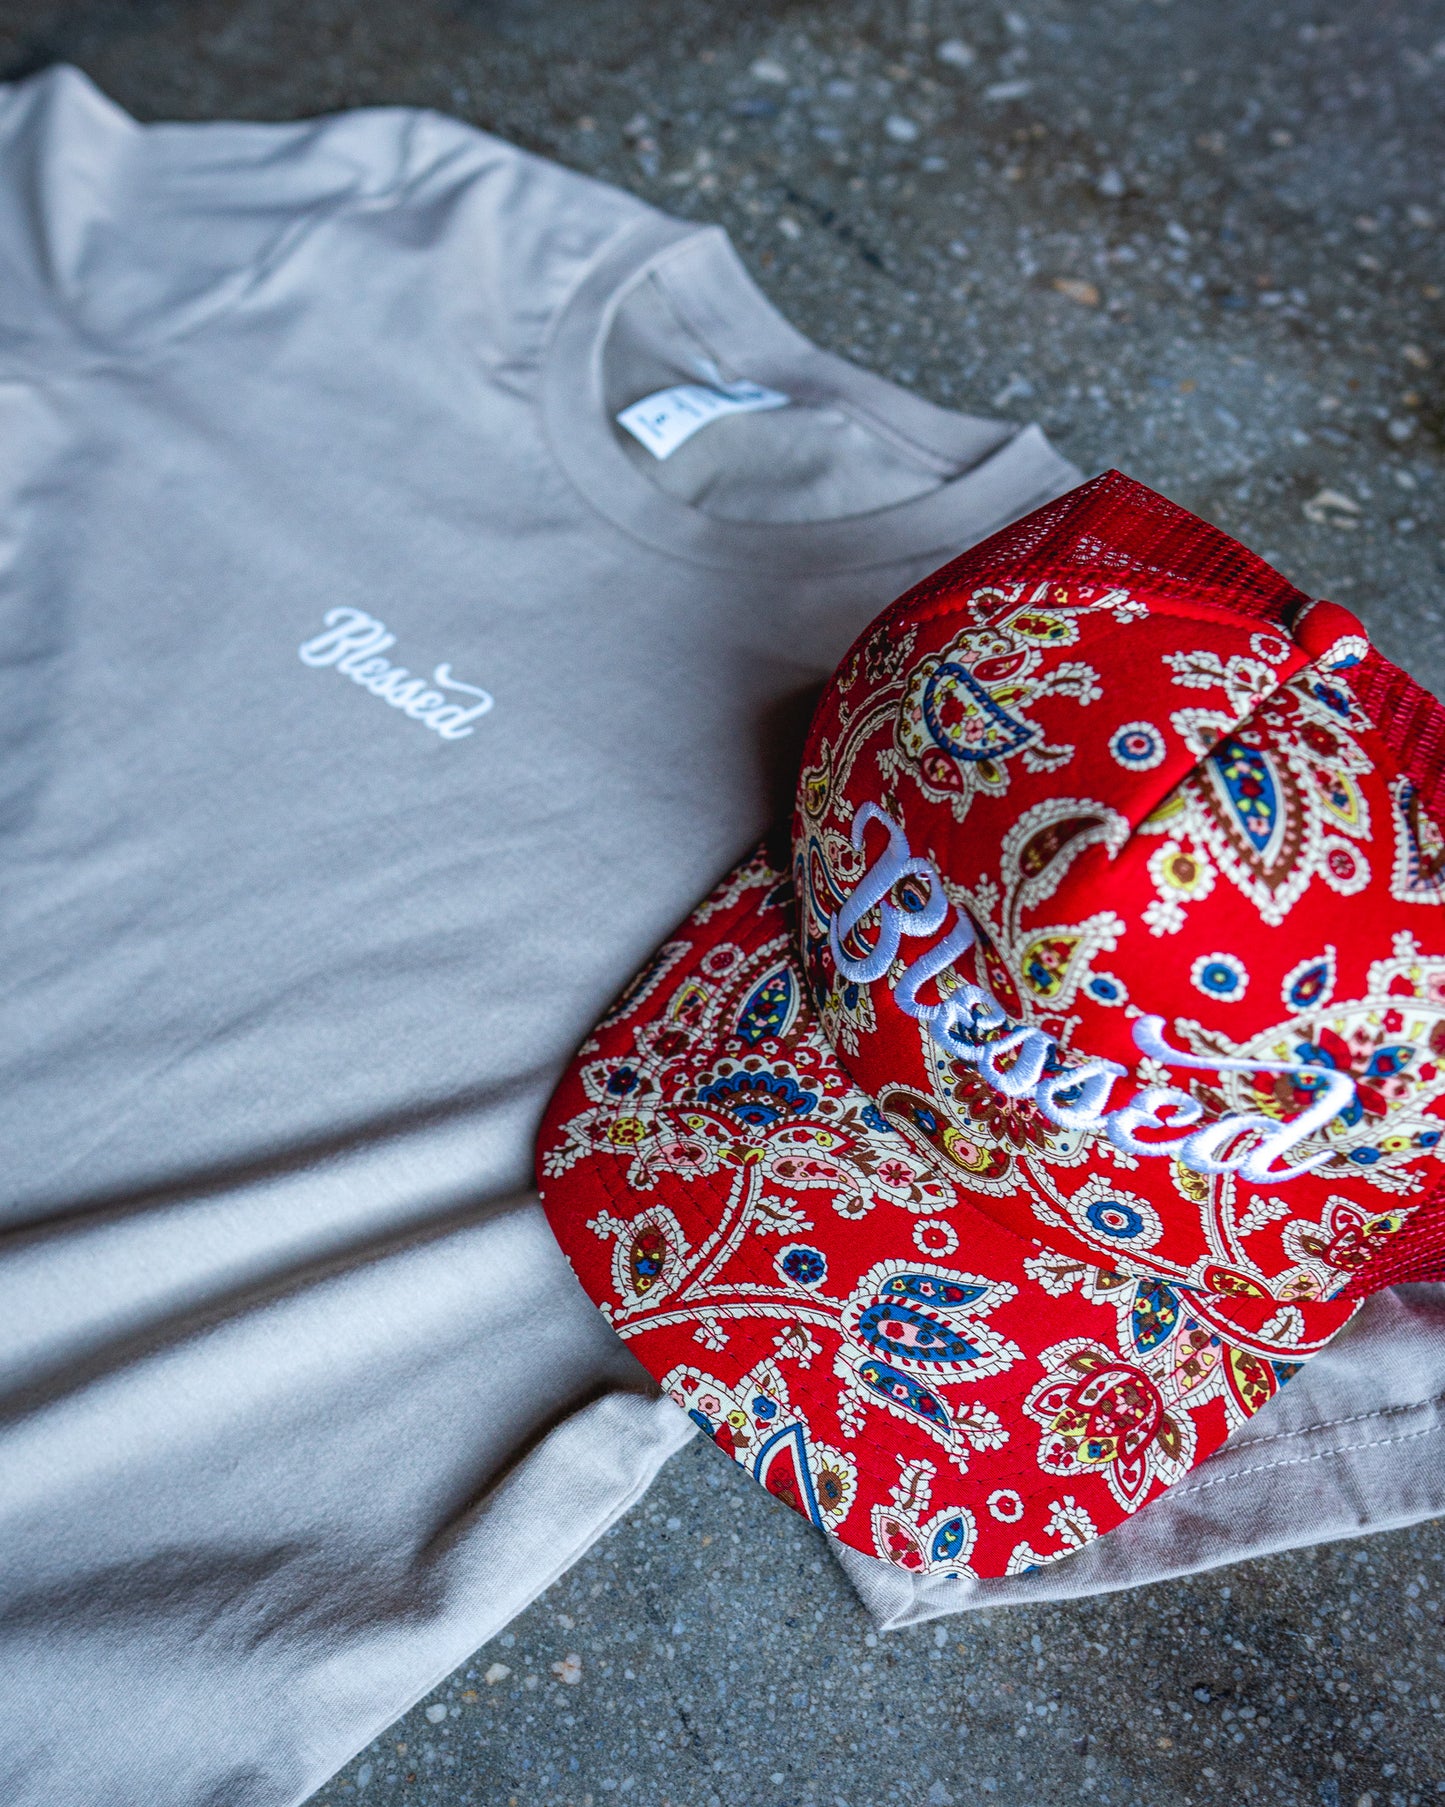 Blessed Adult Box T-Shirt & Red Paisley Trucker Bundle